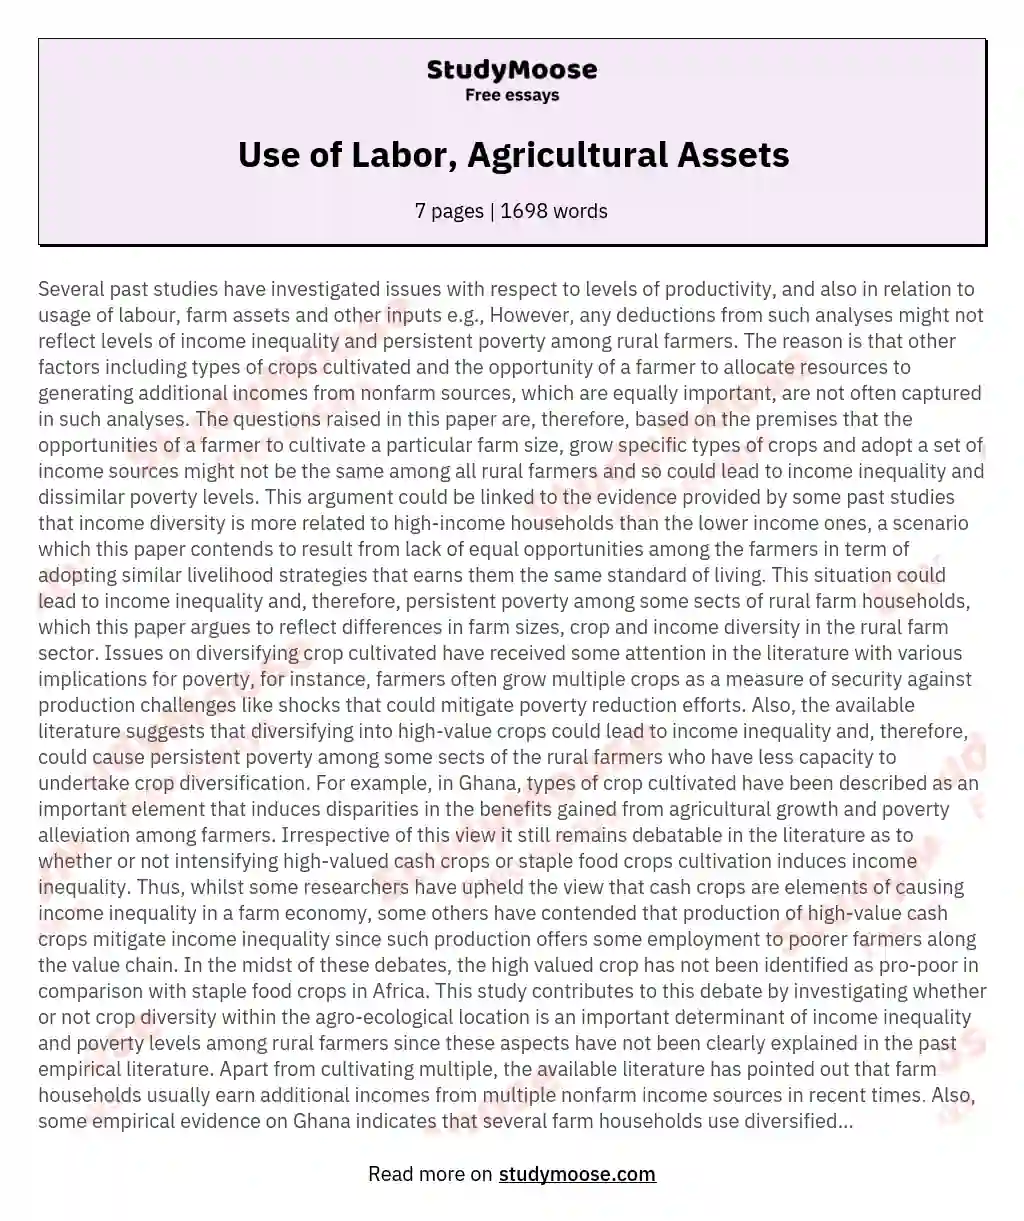 Use of Labor, Agricultural Assets essay